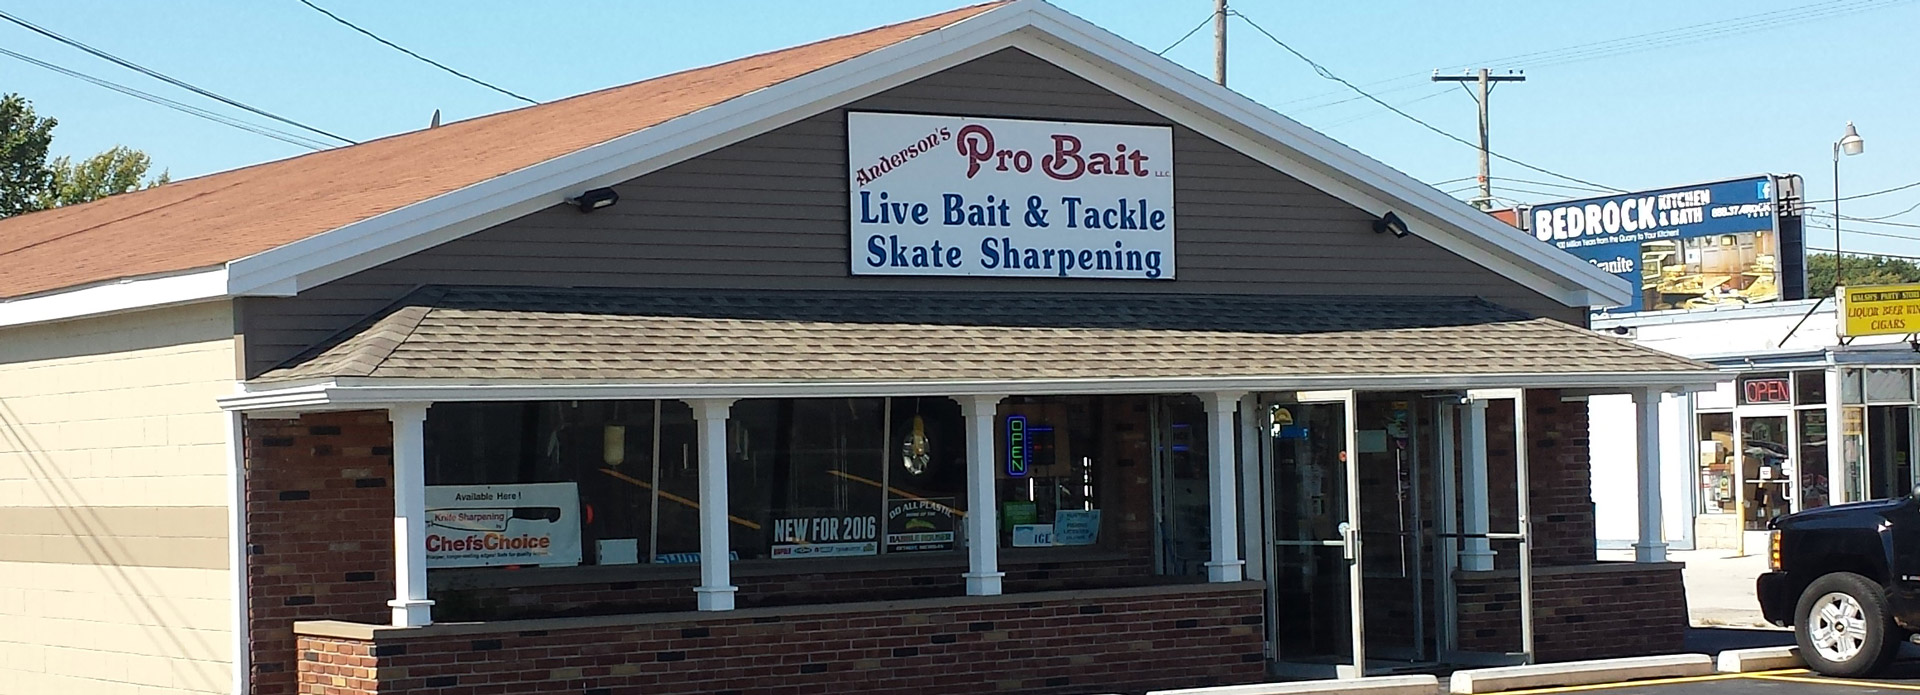 Fishing Tackle and Bait Store in Port Huron Michigan